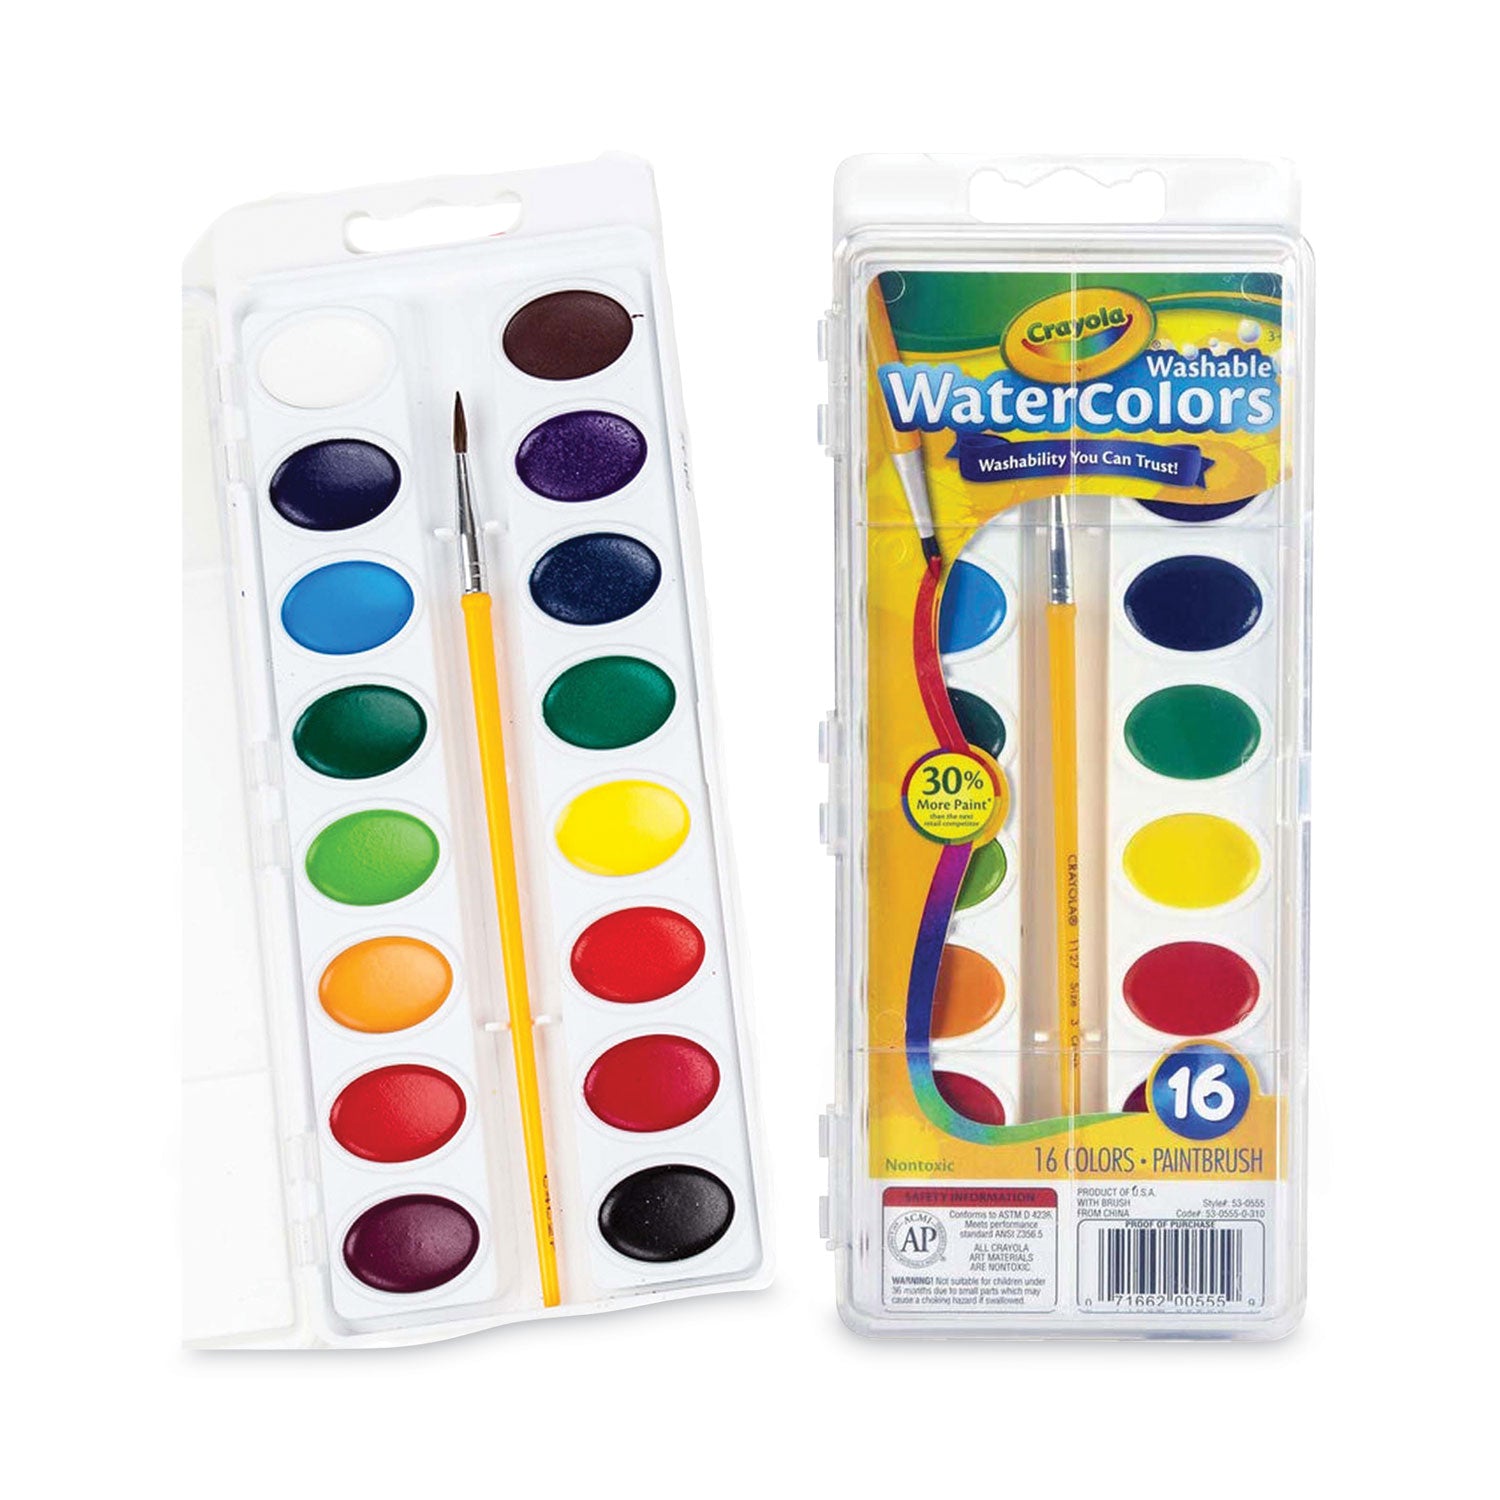 Washable Watercolors, 16 Assorted Colors, Palette Tray - 